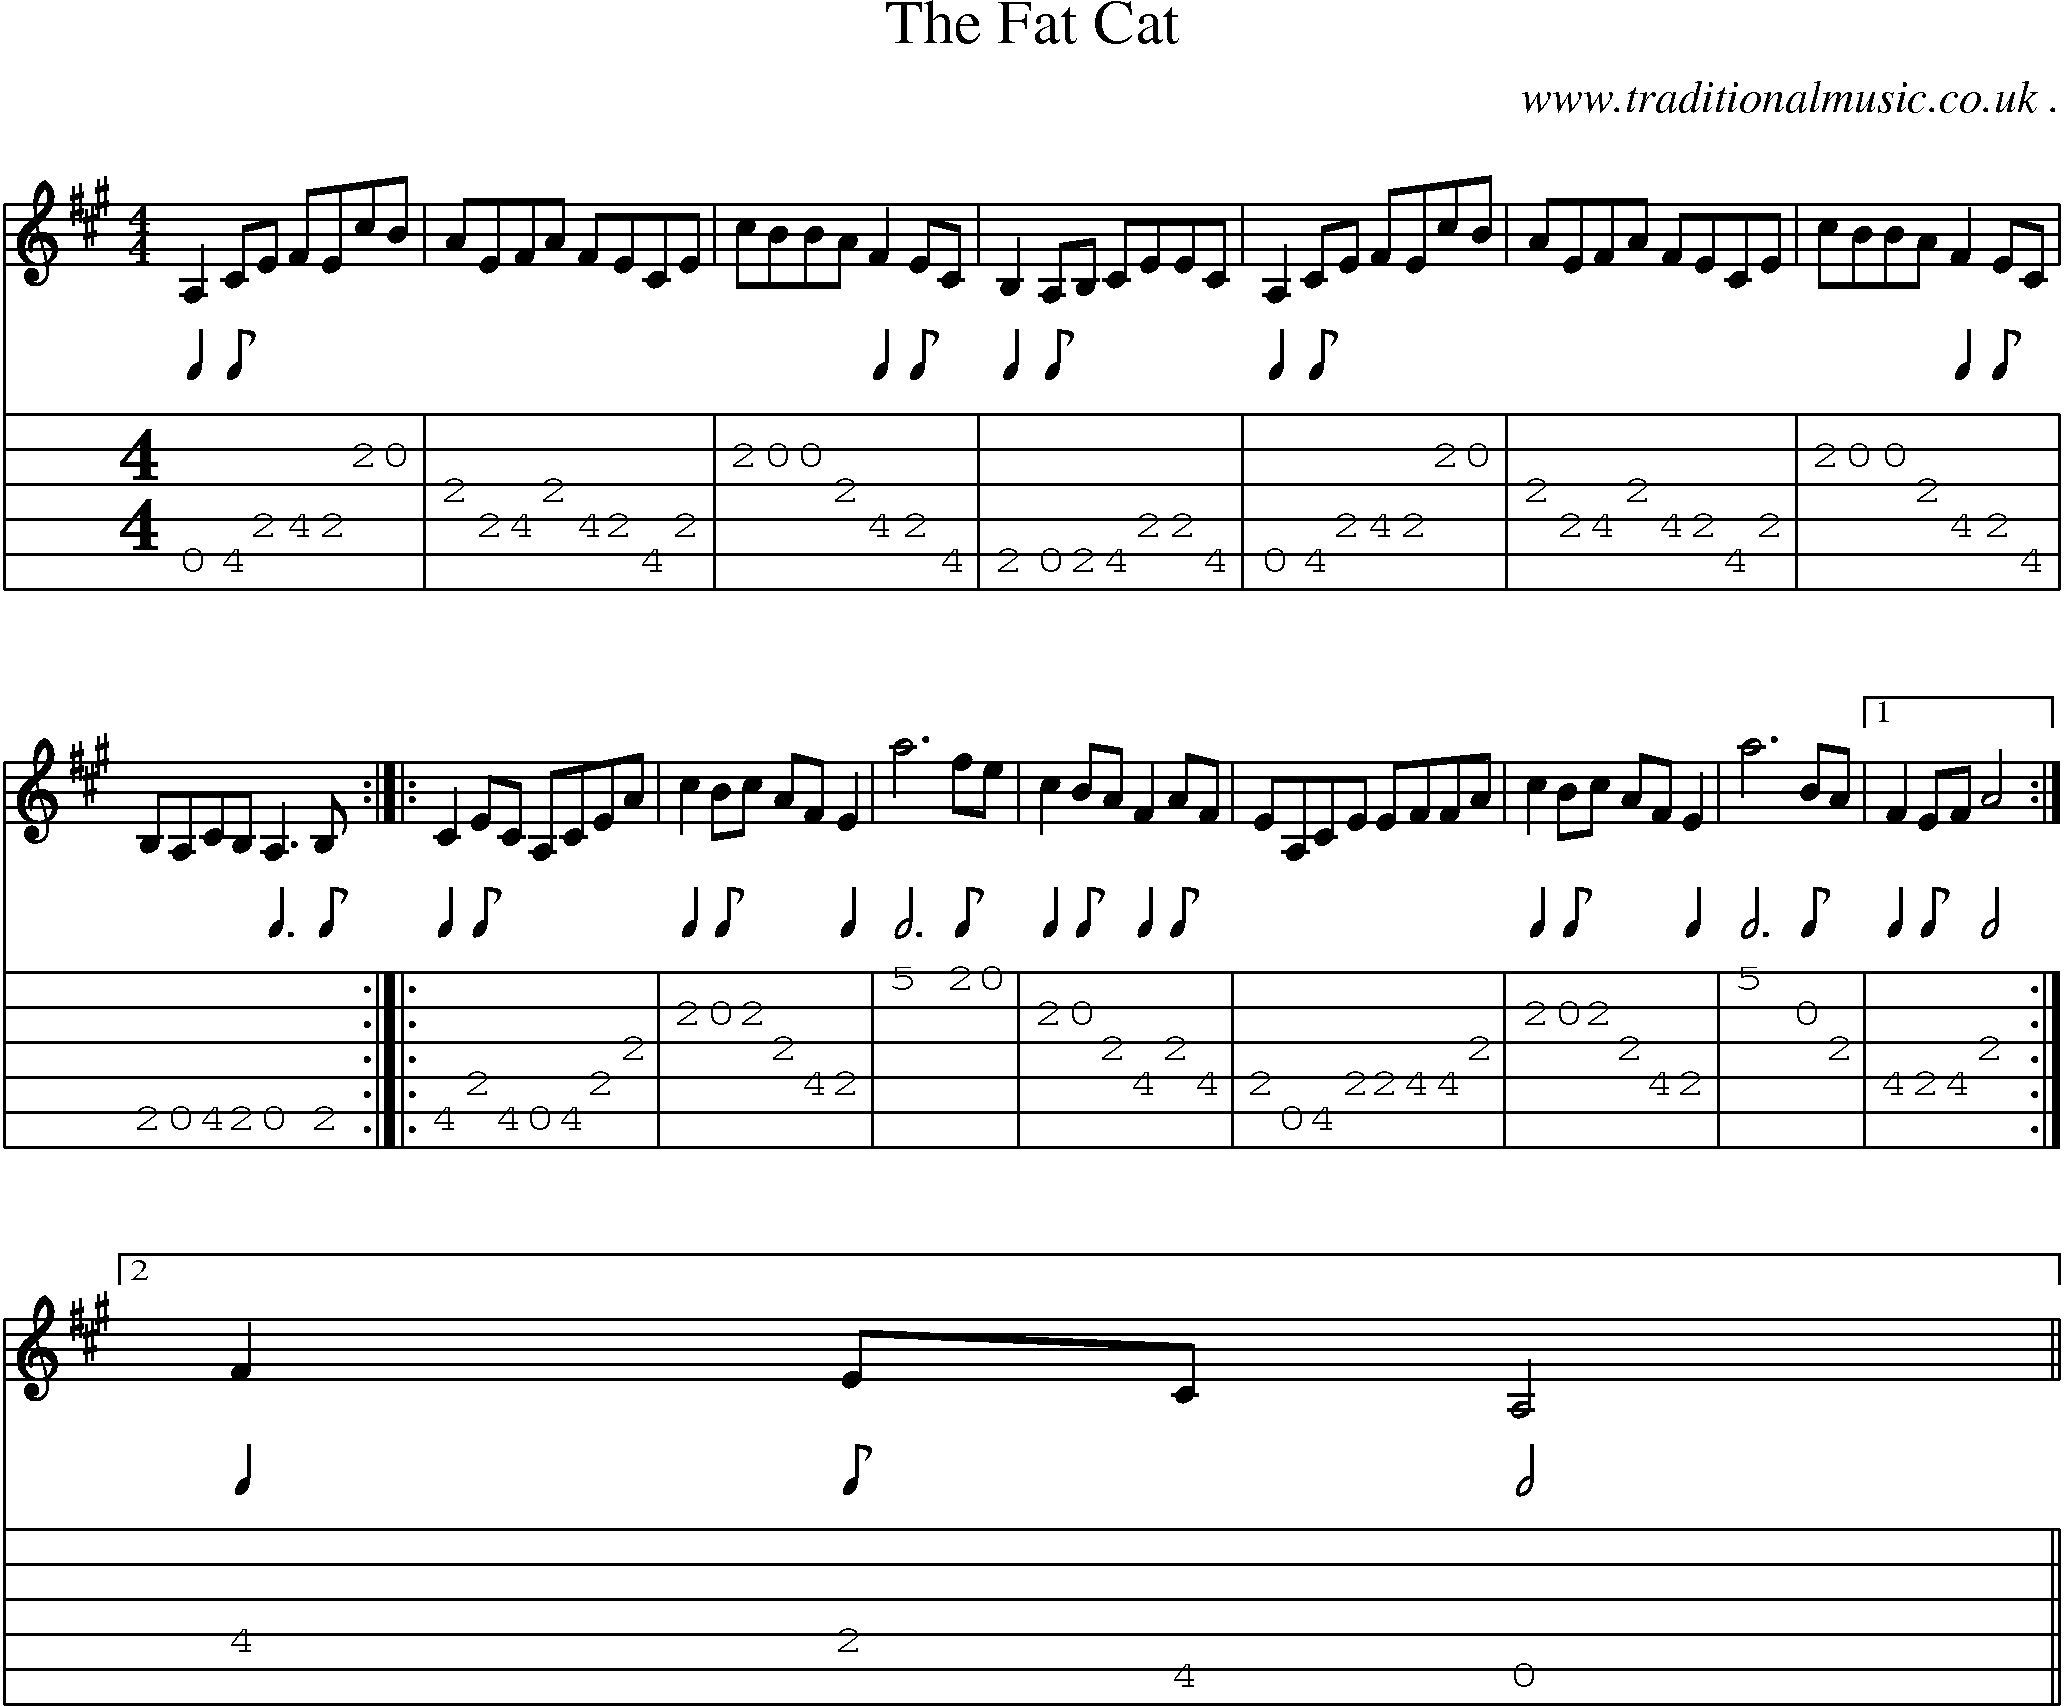 Sheet-Music and Guitar Tabs for The Fat Cat